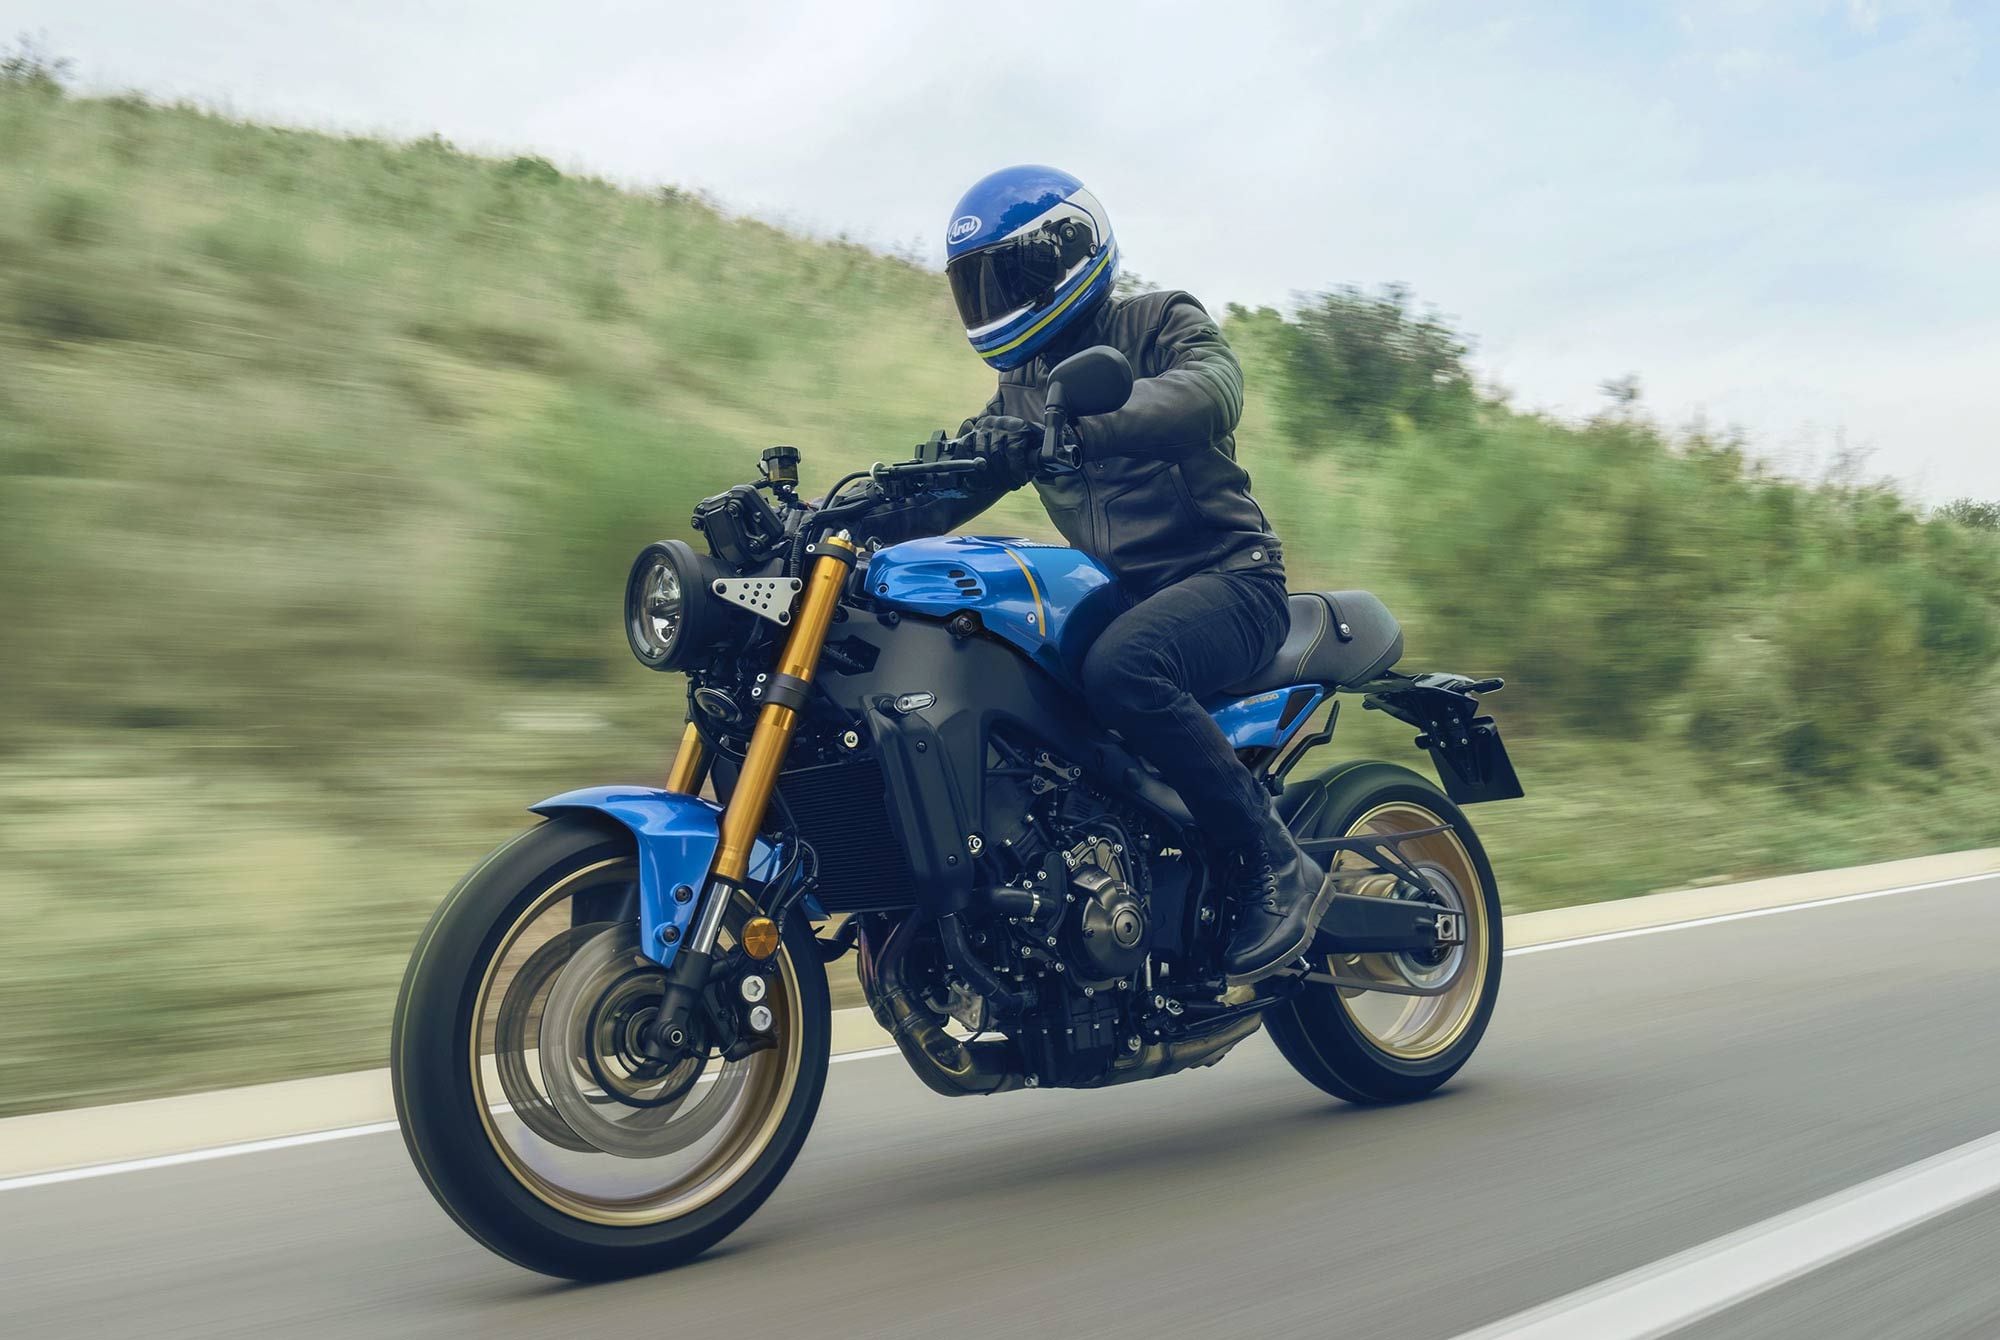 Yamaha gives the 2022 XSR900 a long overdue update, with a bigger engine, more power, and fresher styling. | Photo: